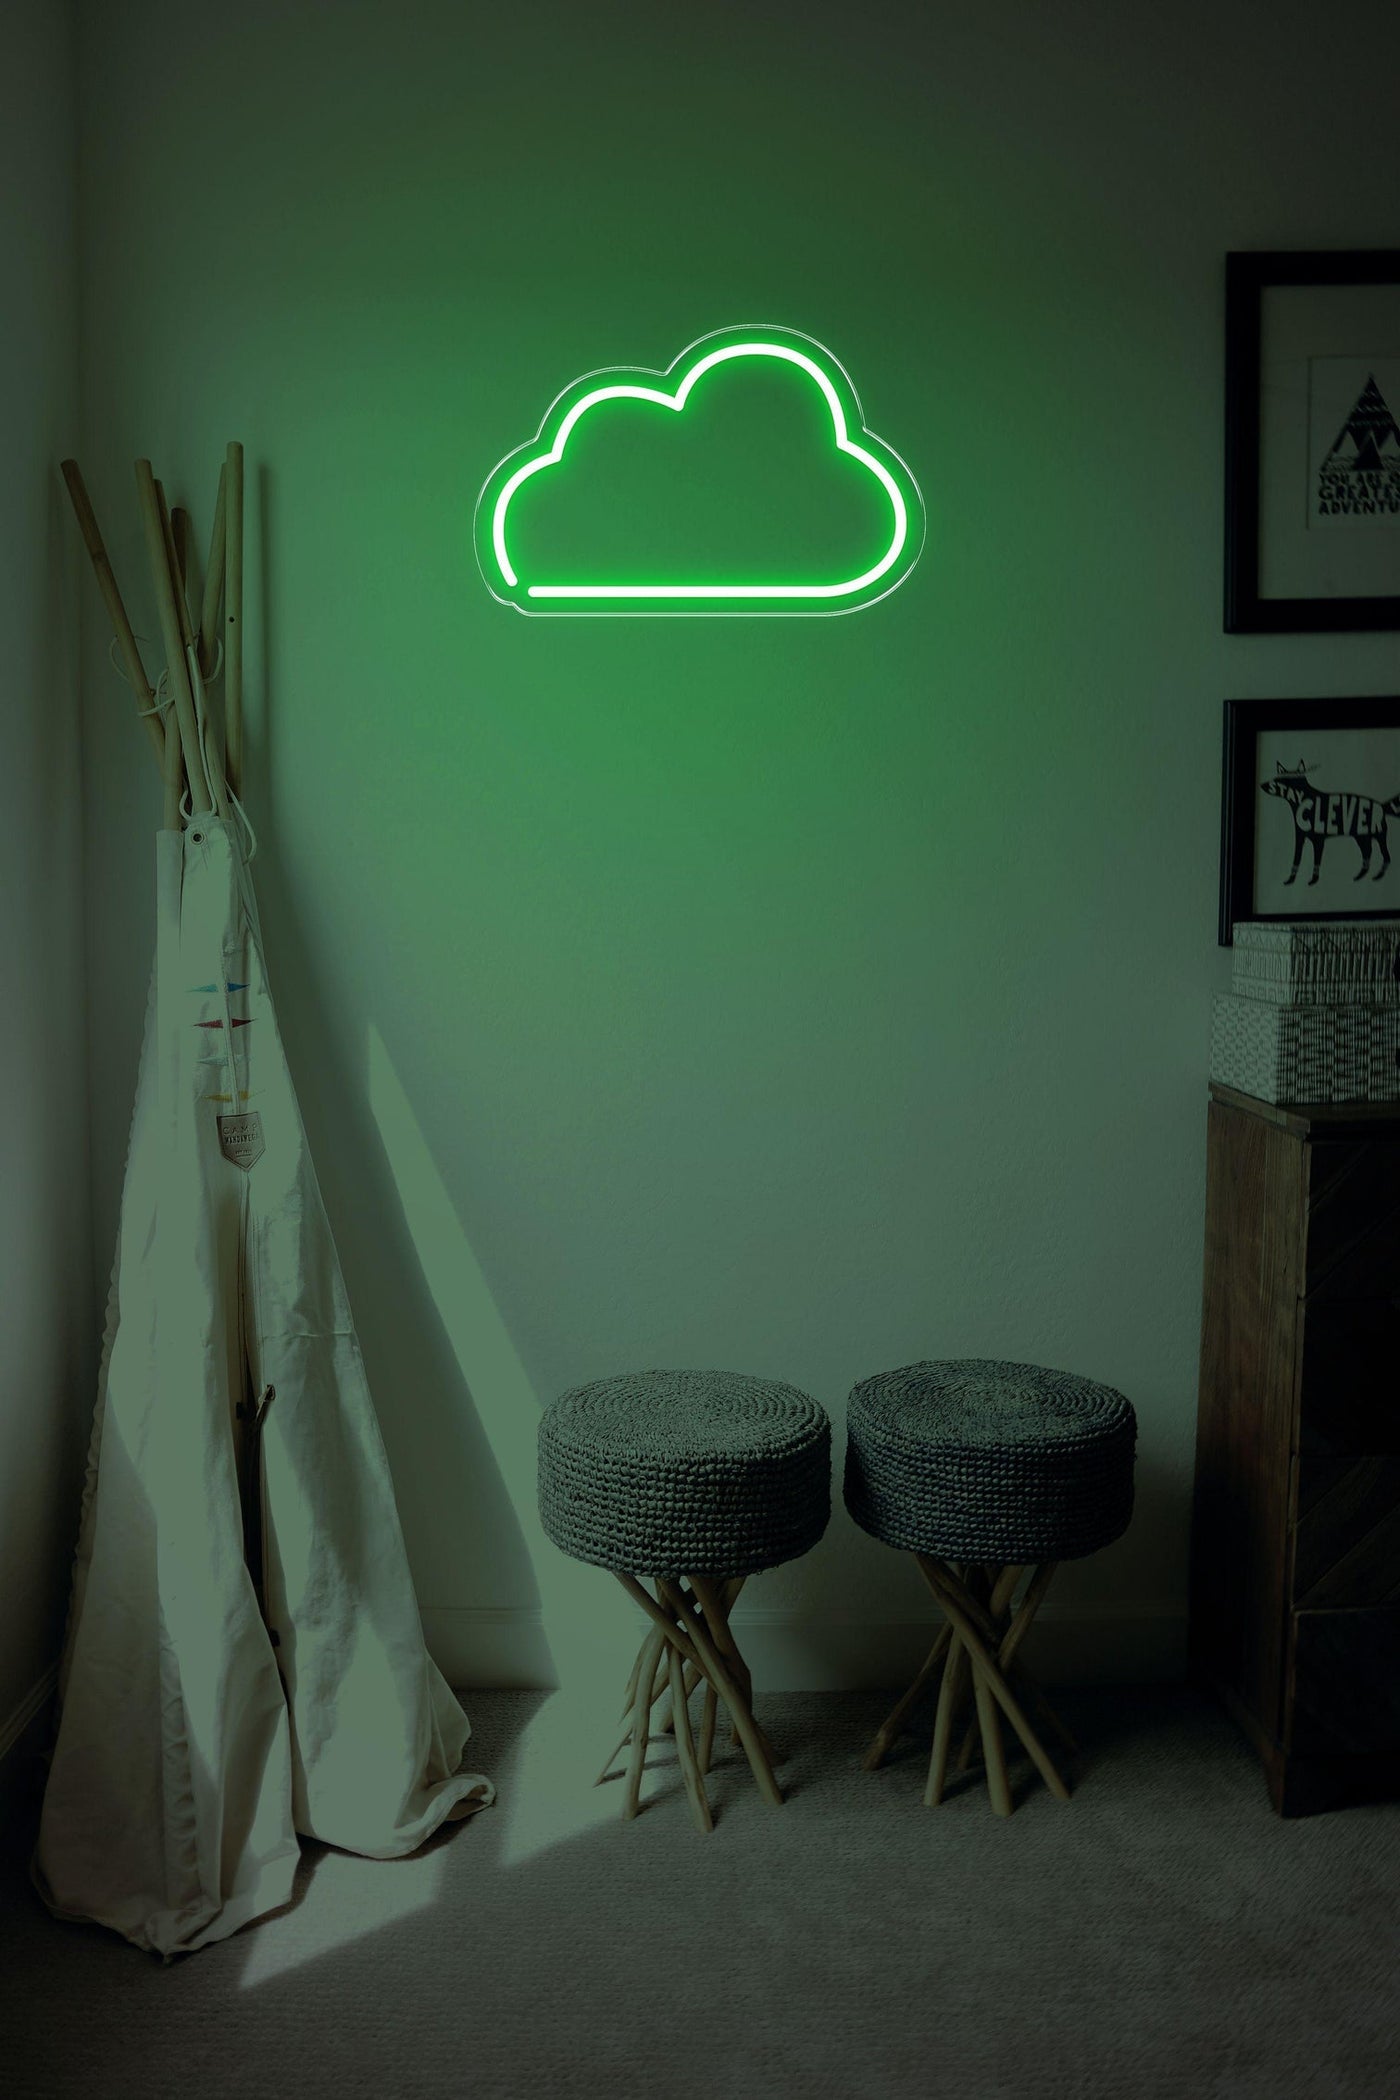 Cloud LED neon sign - 22inch x 14inchGreen